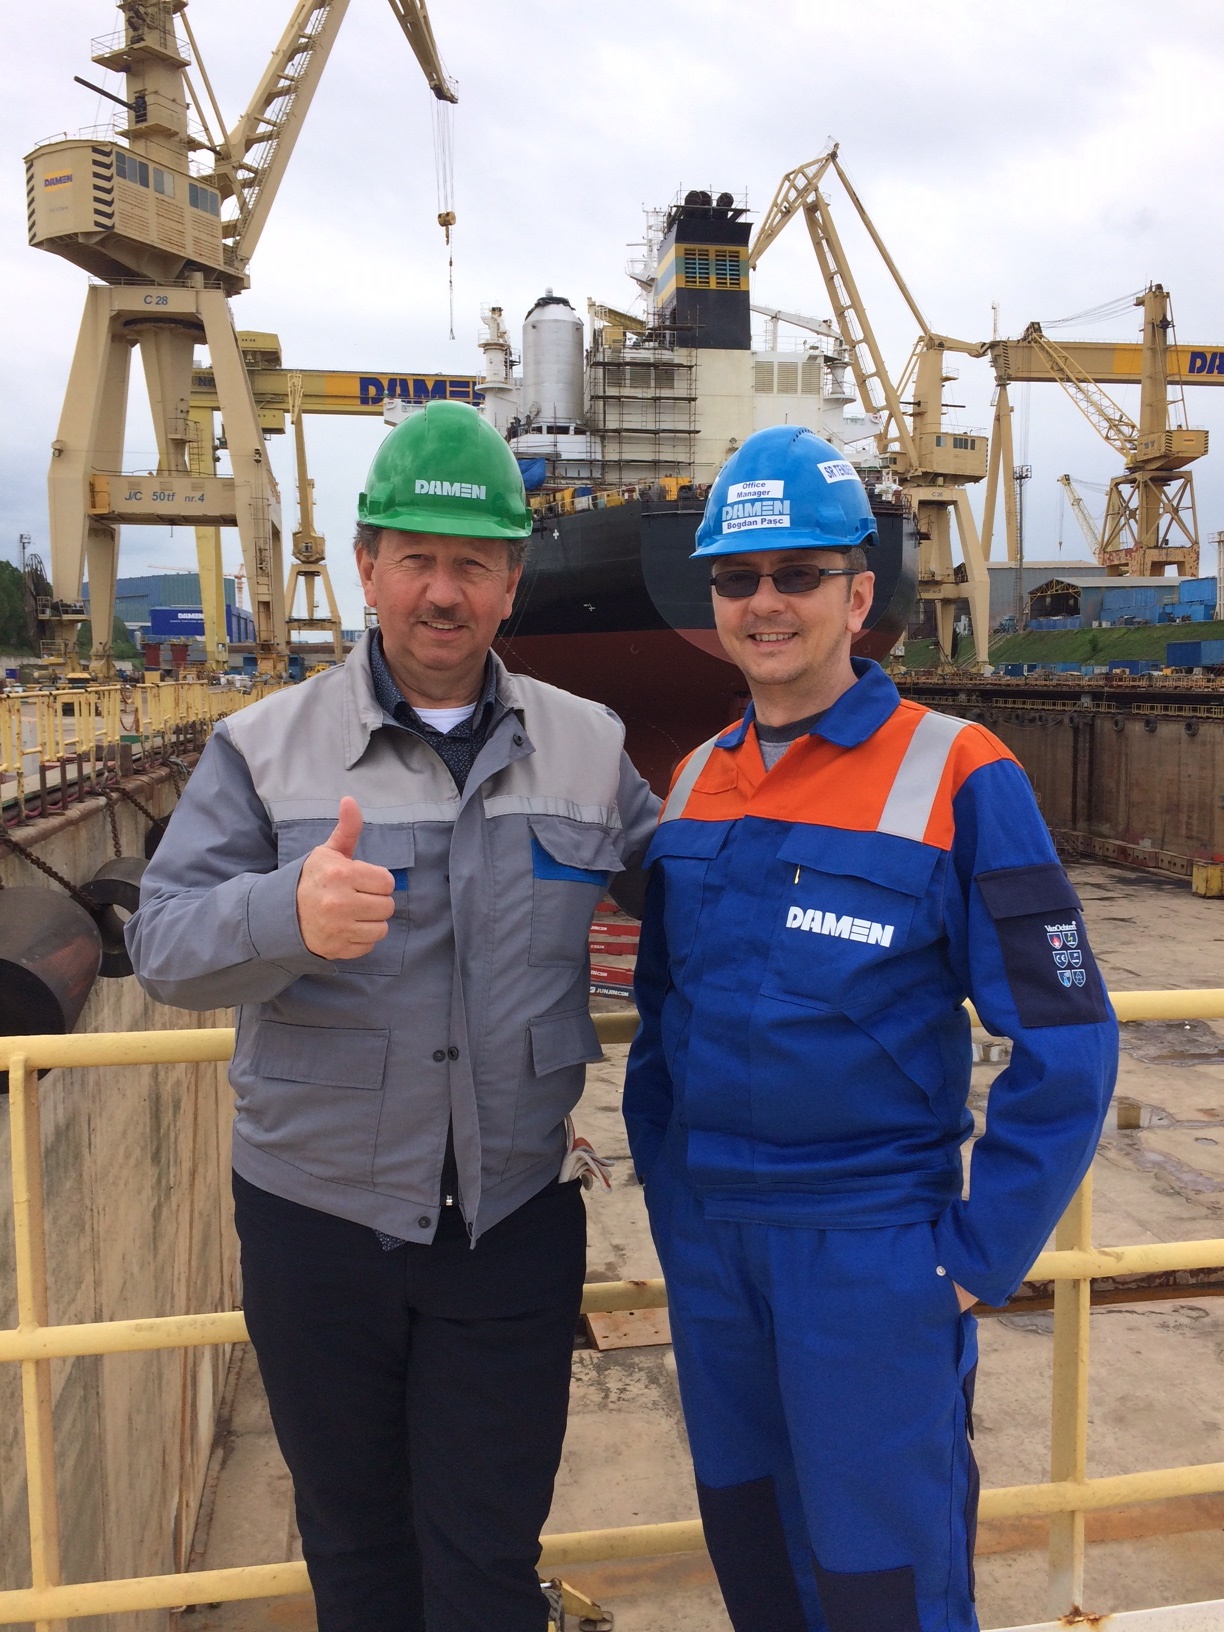 Area Manager for Greece, of DAMEN Shiprepair & Conversion, Mr. Carlos de Vliegere (on the left) and Sales Manager of DAMEN Shipyards Mangalia, Mr. Bogdan Pasc (on the right) visiting the Dock where M/V  AGRARI  - first of the 10  vessels of TMS TANKERS’ Project at DAMEN Shipyards Mangalia is under DD repairs, Scrubber and BWTS Installation. April – May 2019.